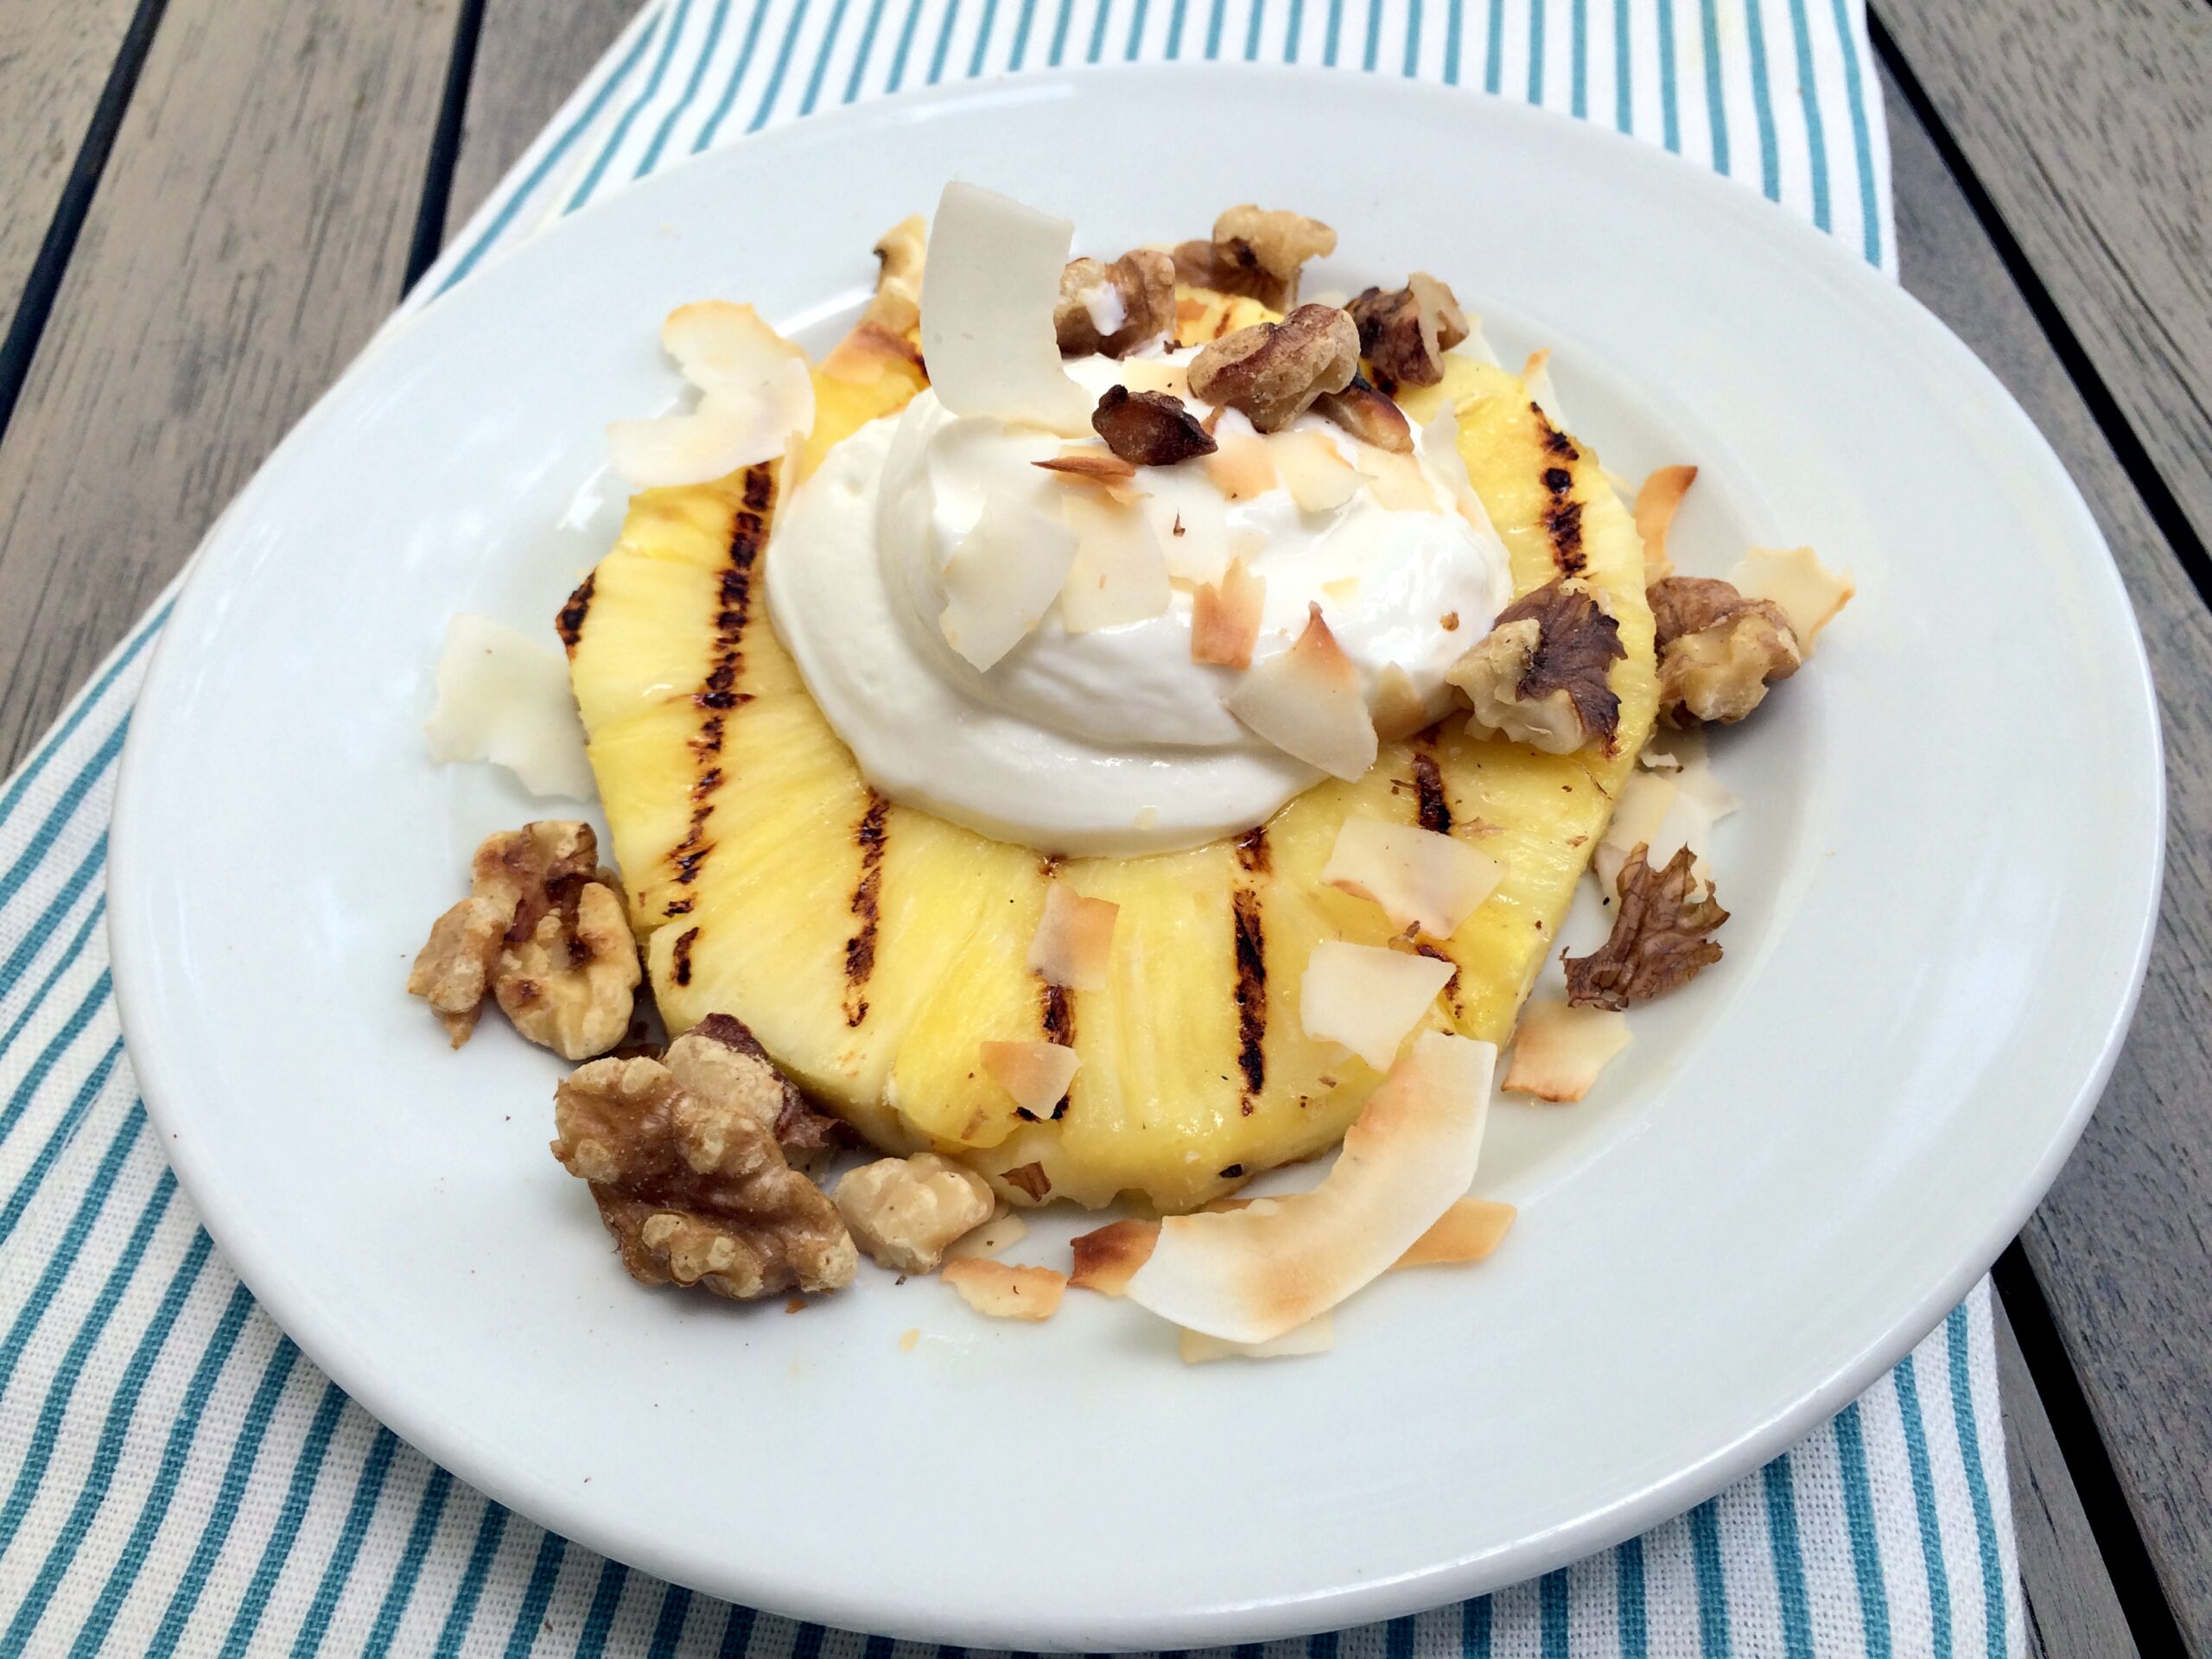 grilled pineapple with cream, coconut, & walnuts - this is a fresh, tasty summer dessert that is festive enough for entertaining but if you have an avid griller in the family it would also make a really festive weekend breakfast!